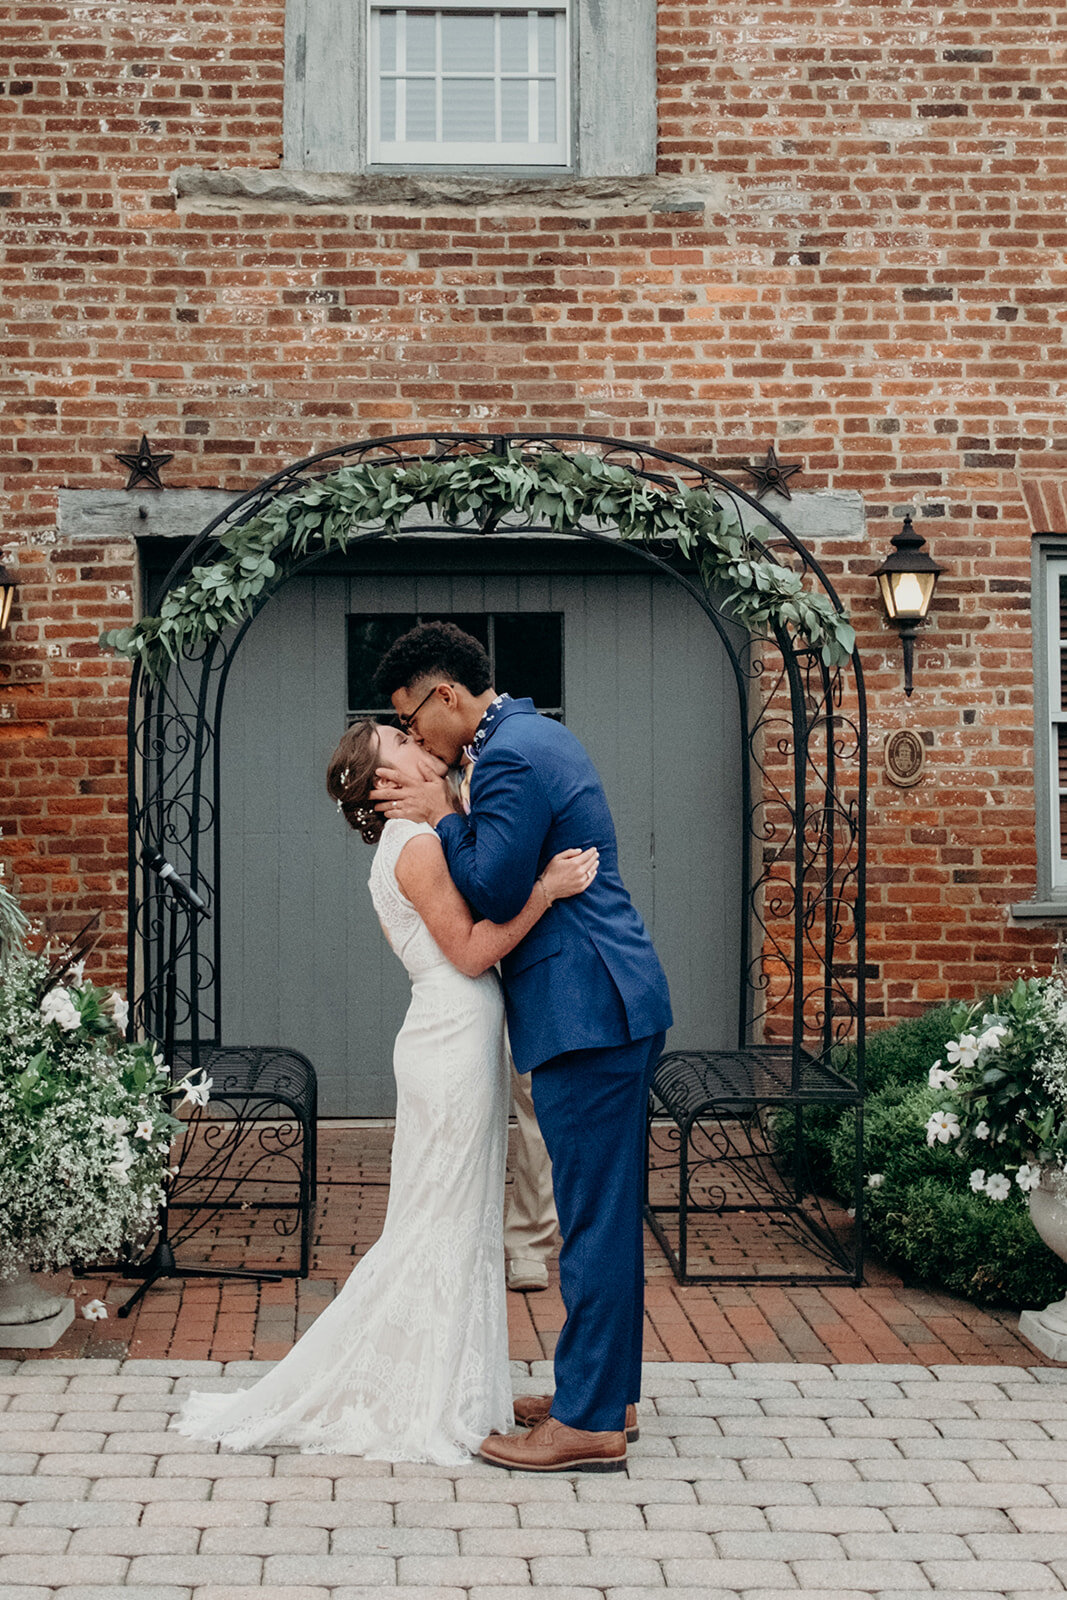 A bride and groom share their first kiss as husband and wife after their outdoor wedding ceremony at Birkby House in Leesburg, VA.